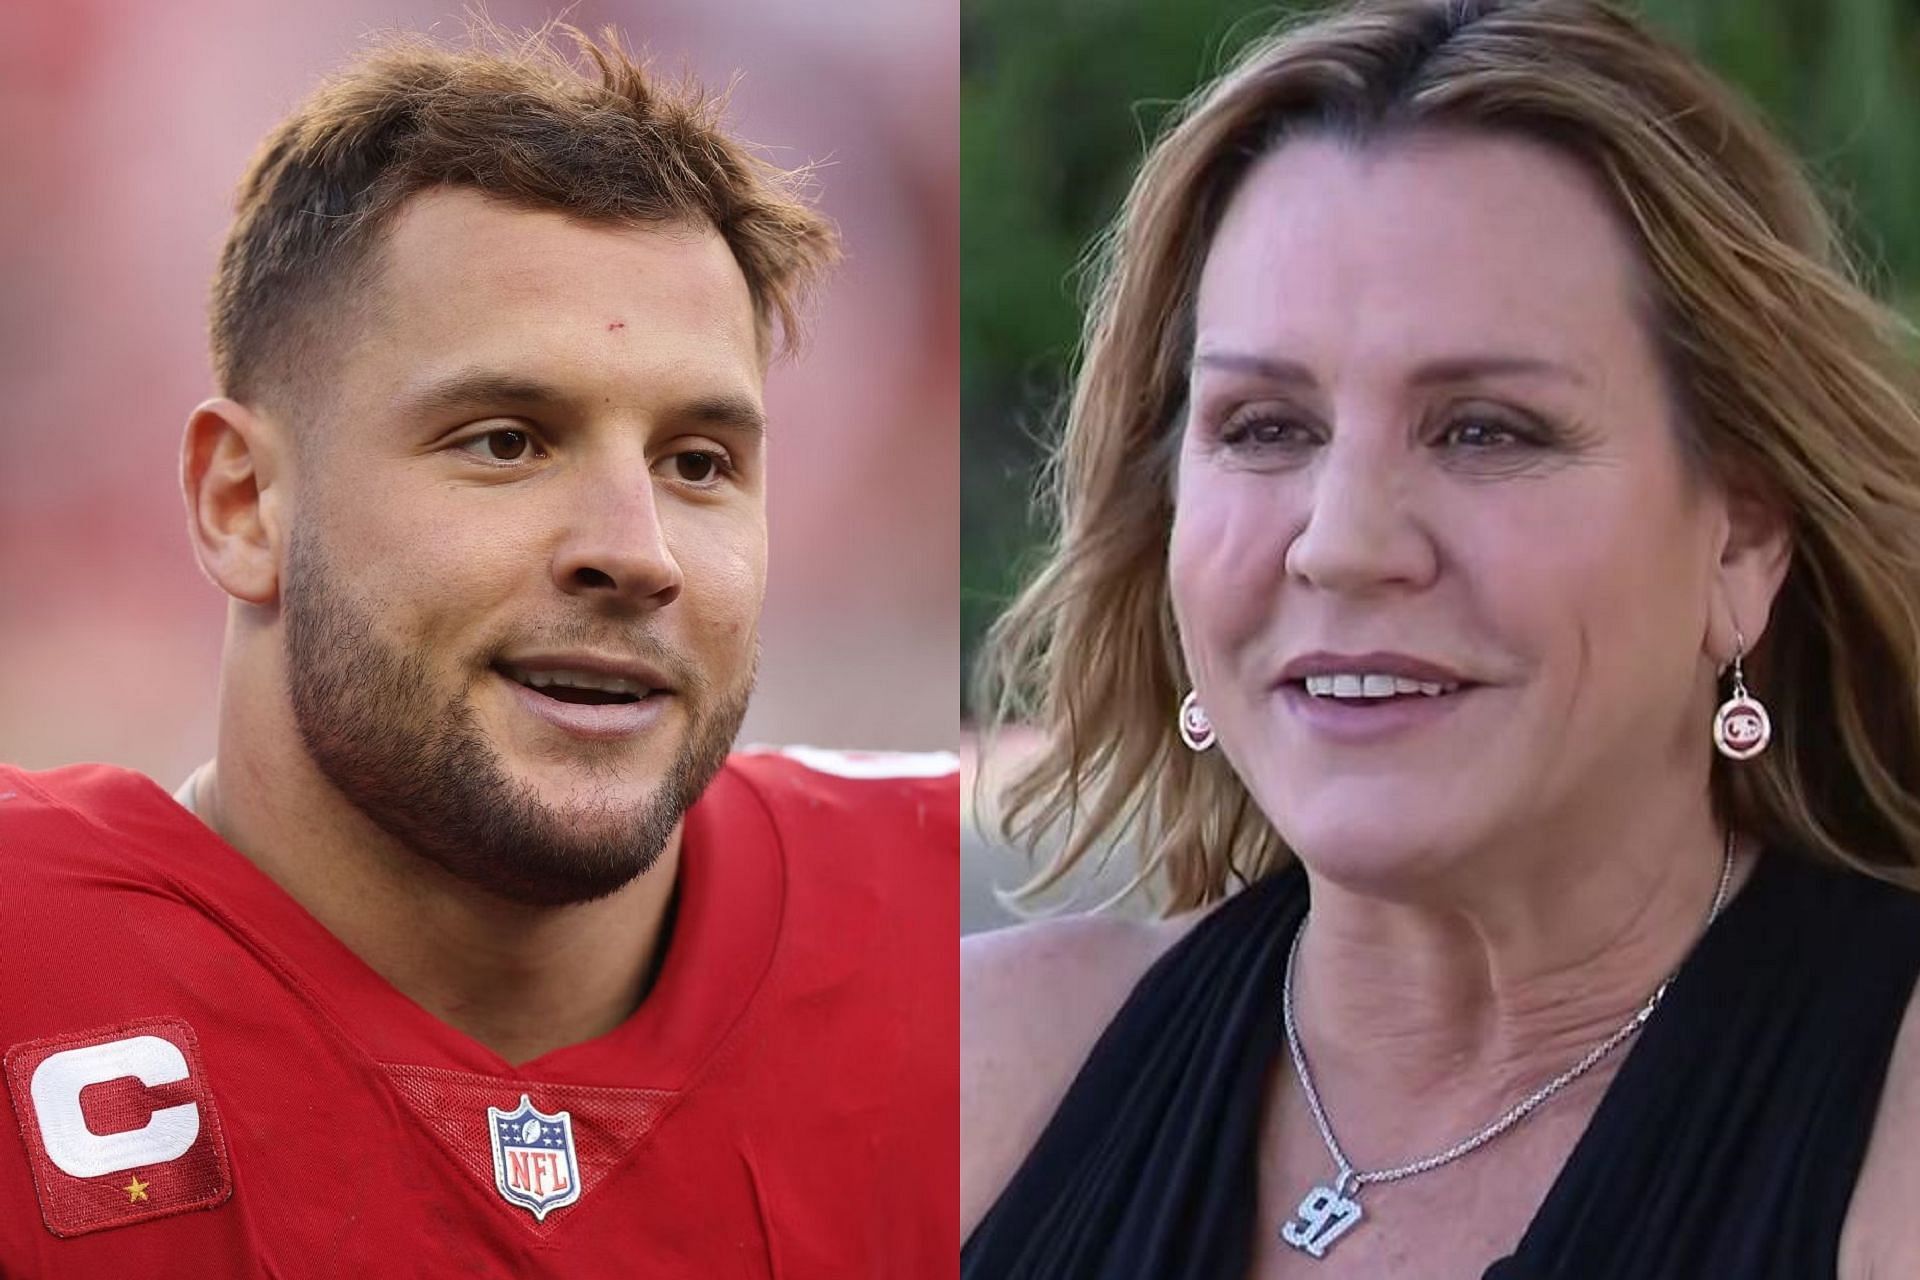 Nick Bosa (L) and mom Cheryl Bosa (R) (Pic Courtesy: Getty and CBS News)